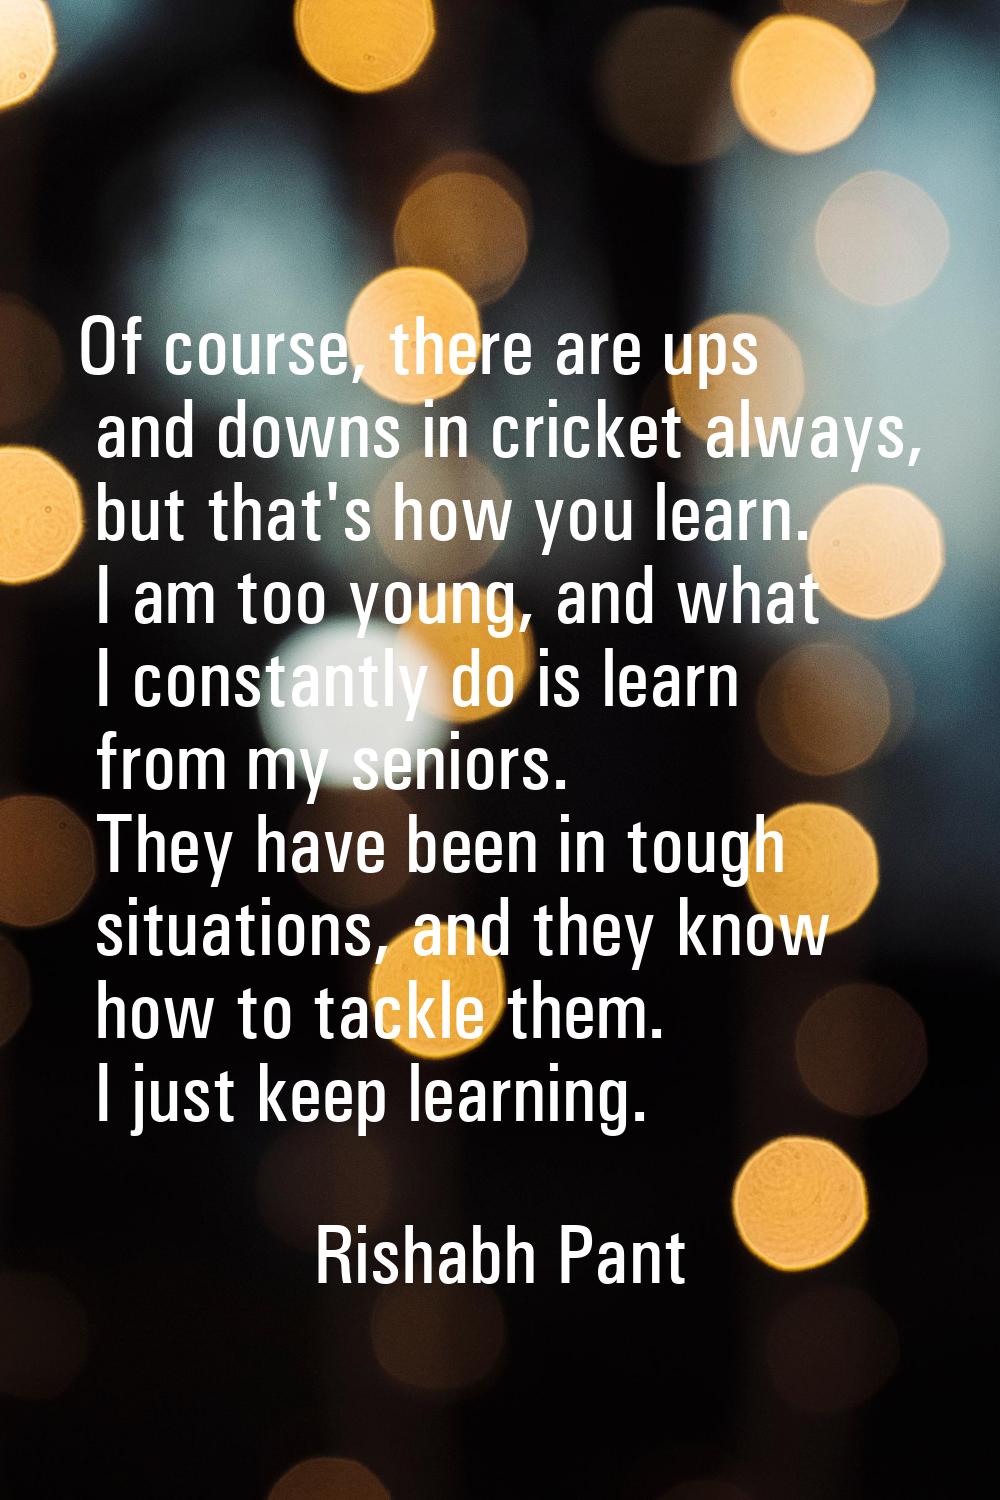 Of course, there are ups and downs in cricket always, but that's how you learn. I am too young, and